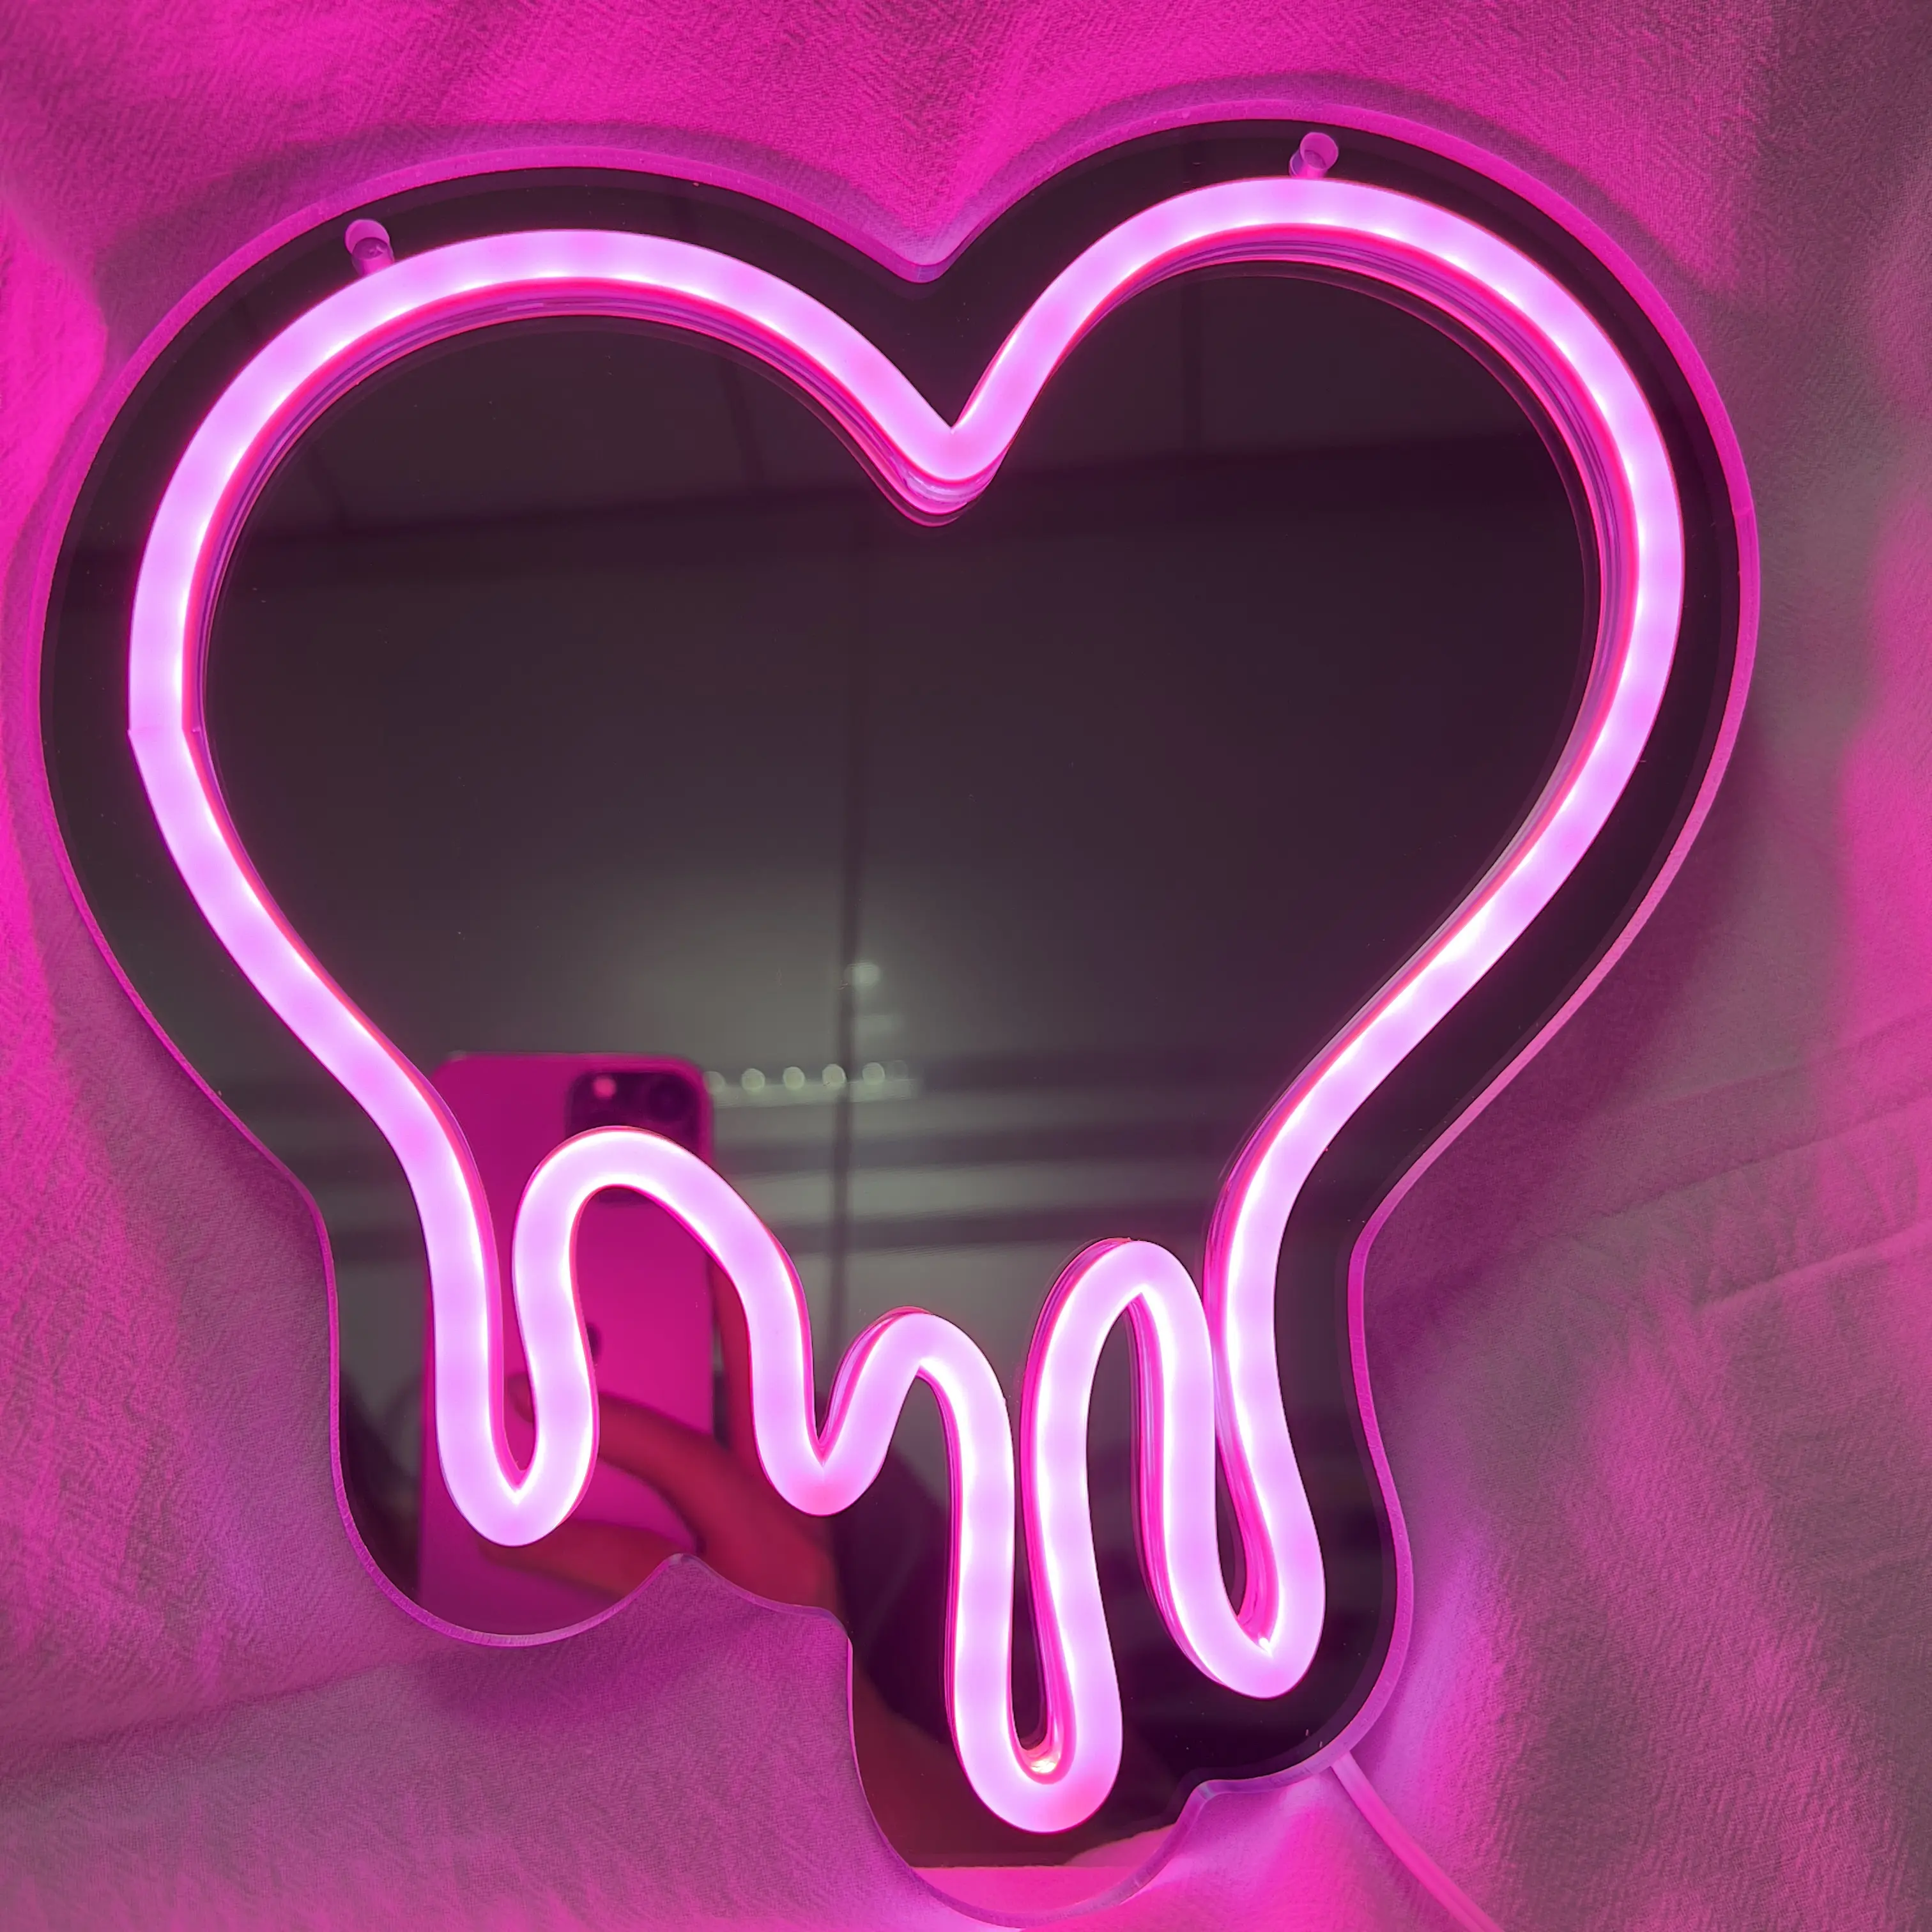 Heart Neon Sign Melt Heart Neon Mirror Signs for Wall Decor, Bedroom, Teens Kids Girls Room, LED Pink Heart Neon Lights for Part